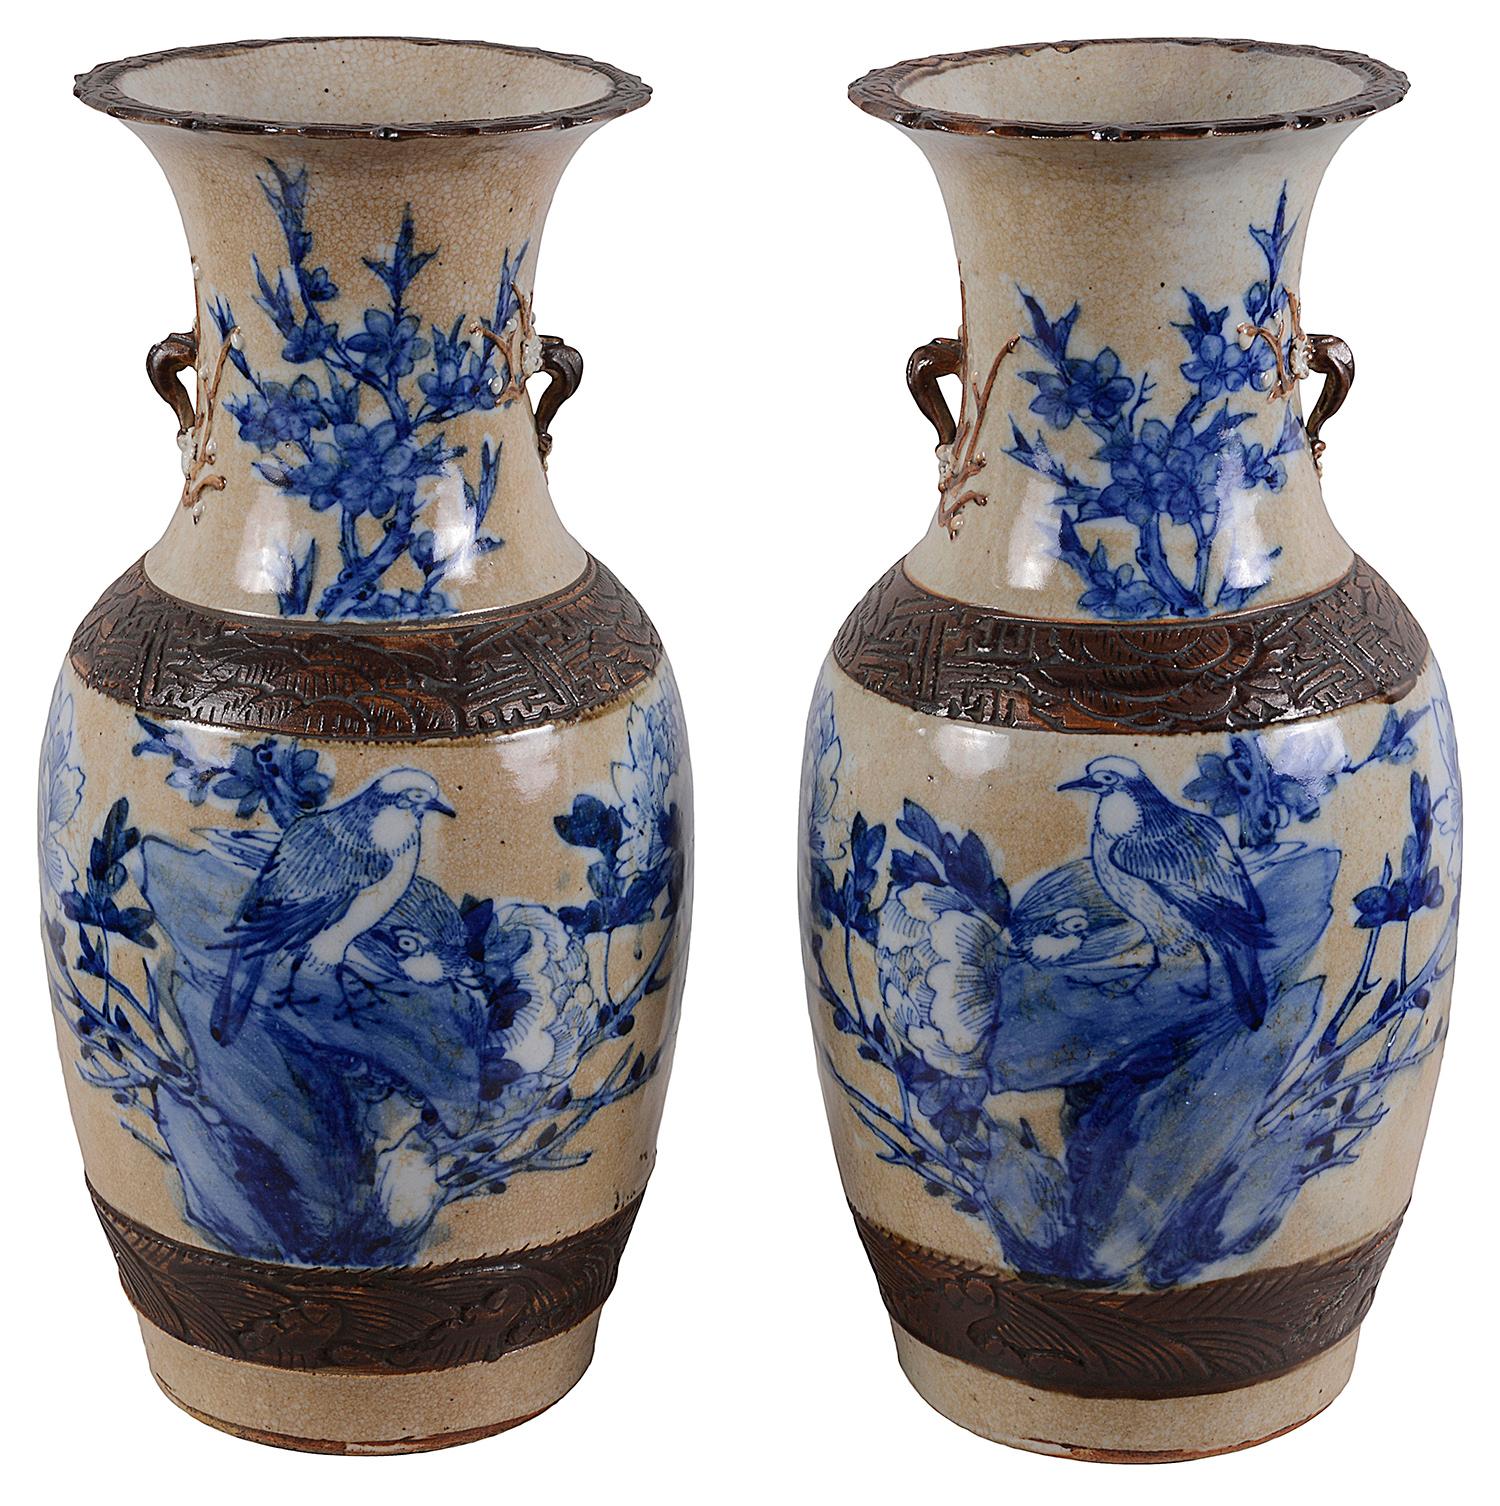 Pair of 19th century Chinese blue and white crackleware vases, each with brown colored engraved bands, and blue and white scenes of Doves on a rocky outcrop surround by flowers and leaves.
We can have these vases wired as lamps if required within